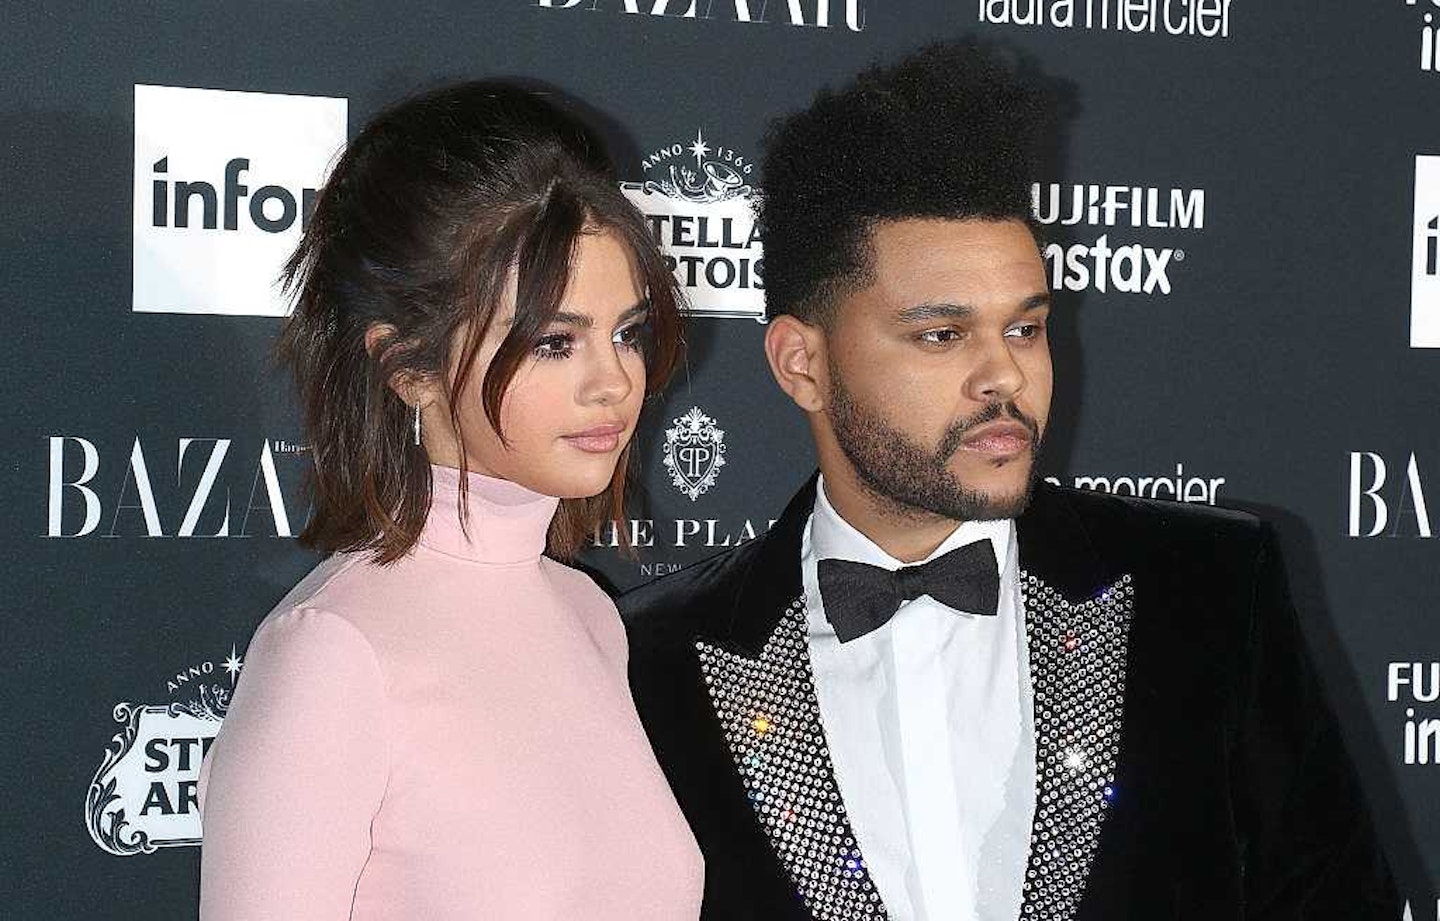 Selena and The Weeknd